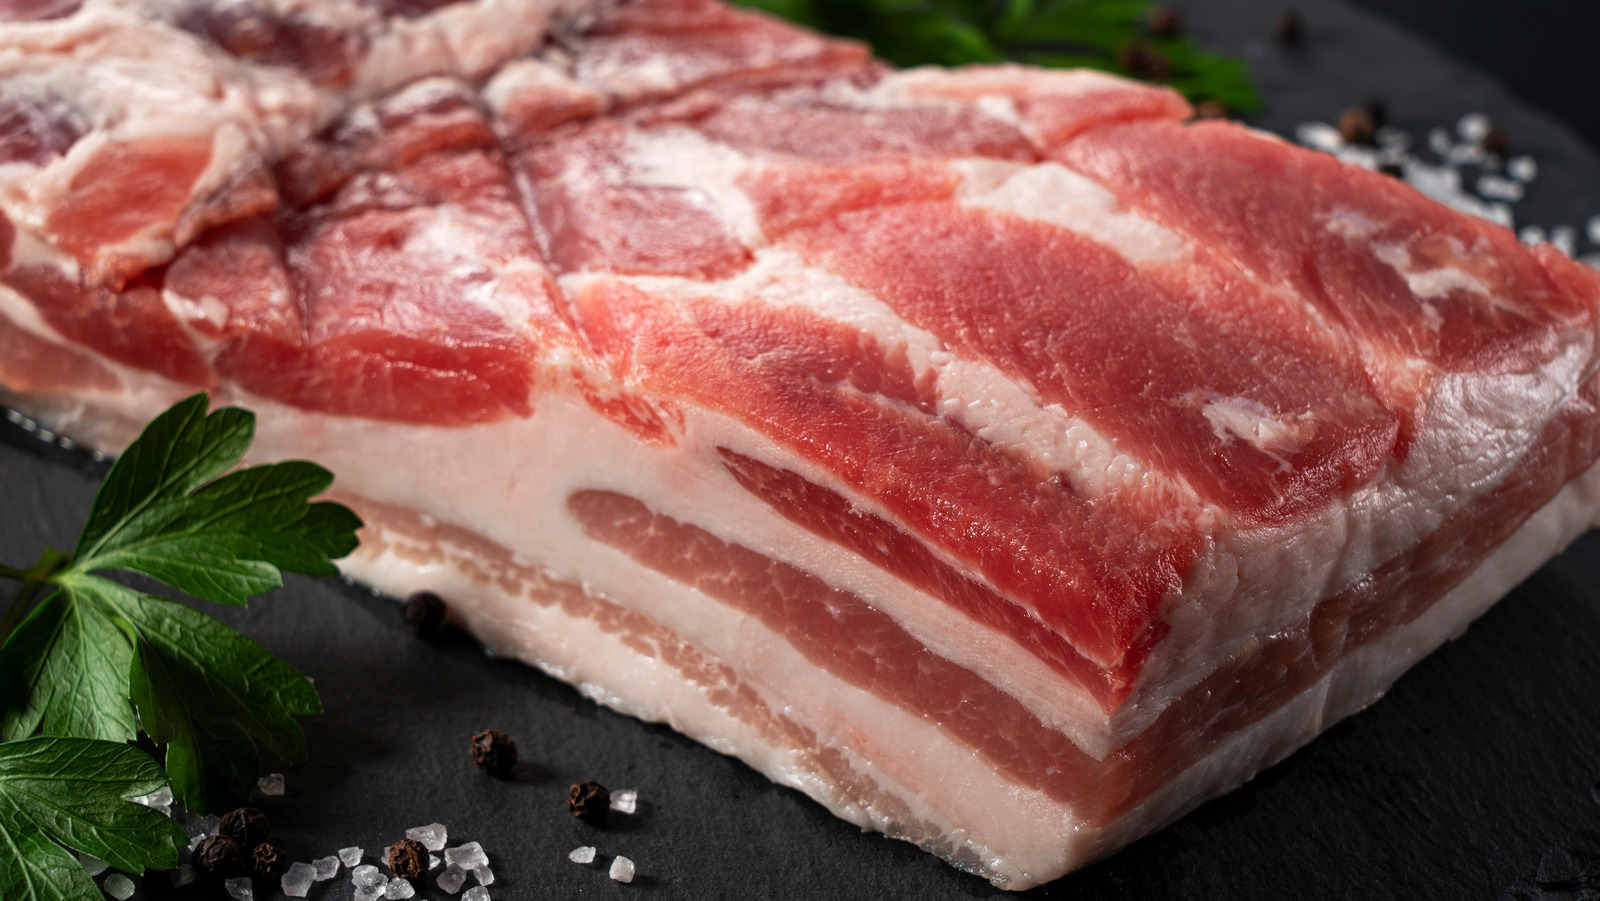 What Makes Pancetta And Bacon Different? - Tasting Table